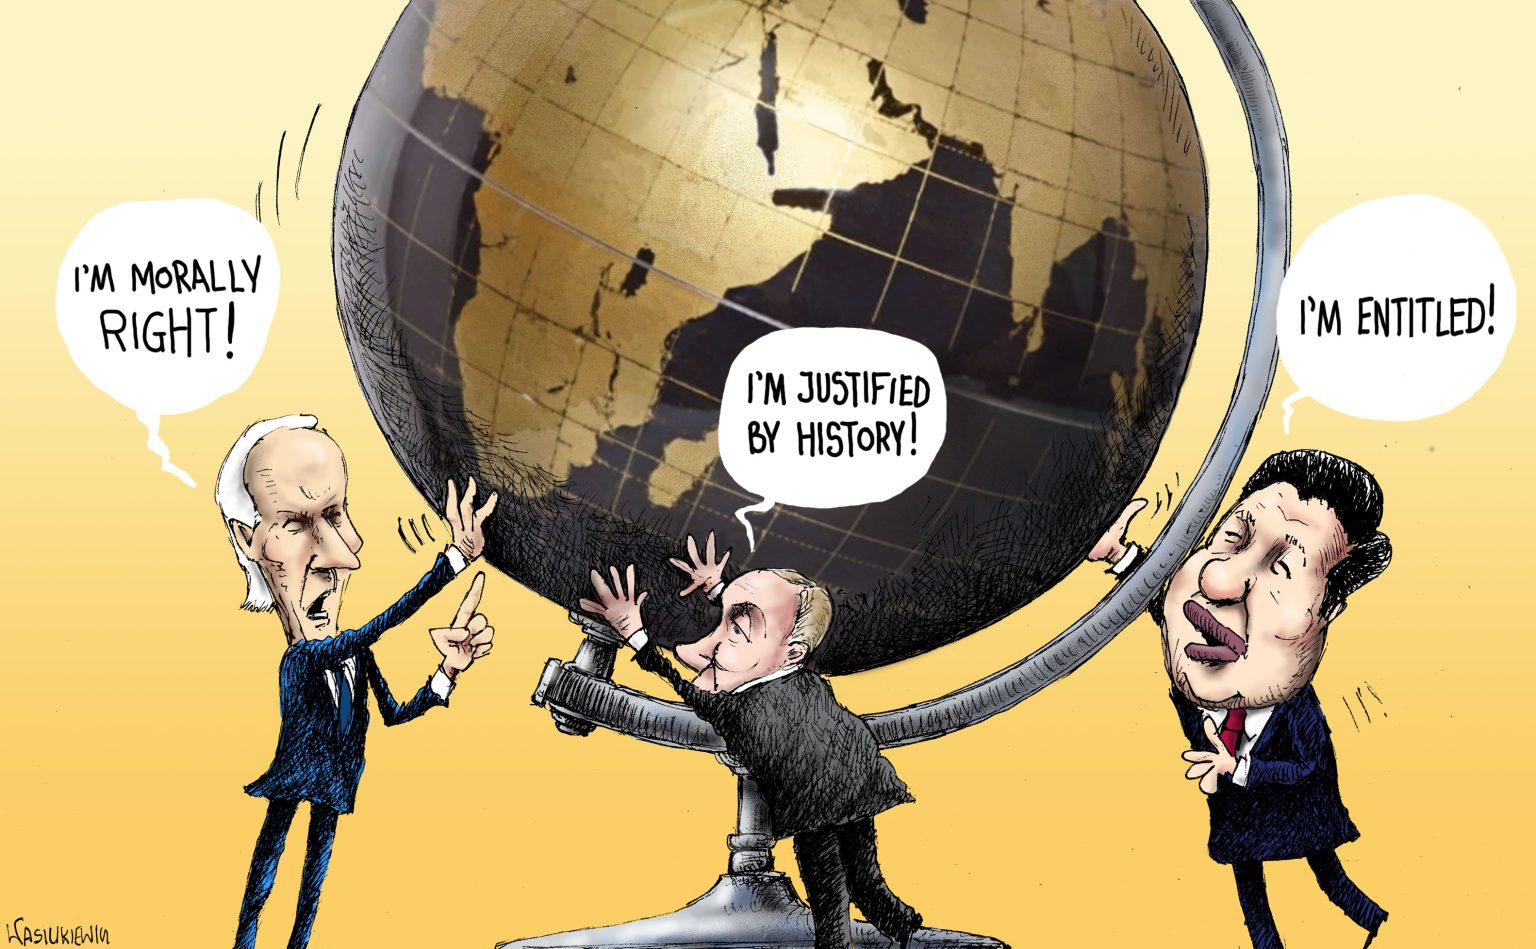 Biden, Putin and Xi “spinning” the globe toward their own narratives The U.S.-led West, Russia and China all have their own narratives that, when followed dogmatically, make it hard for them to coexist. © GIS